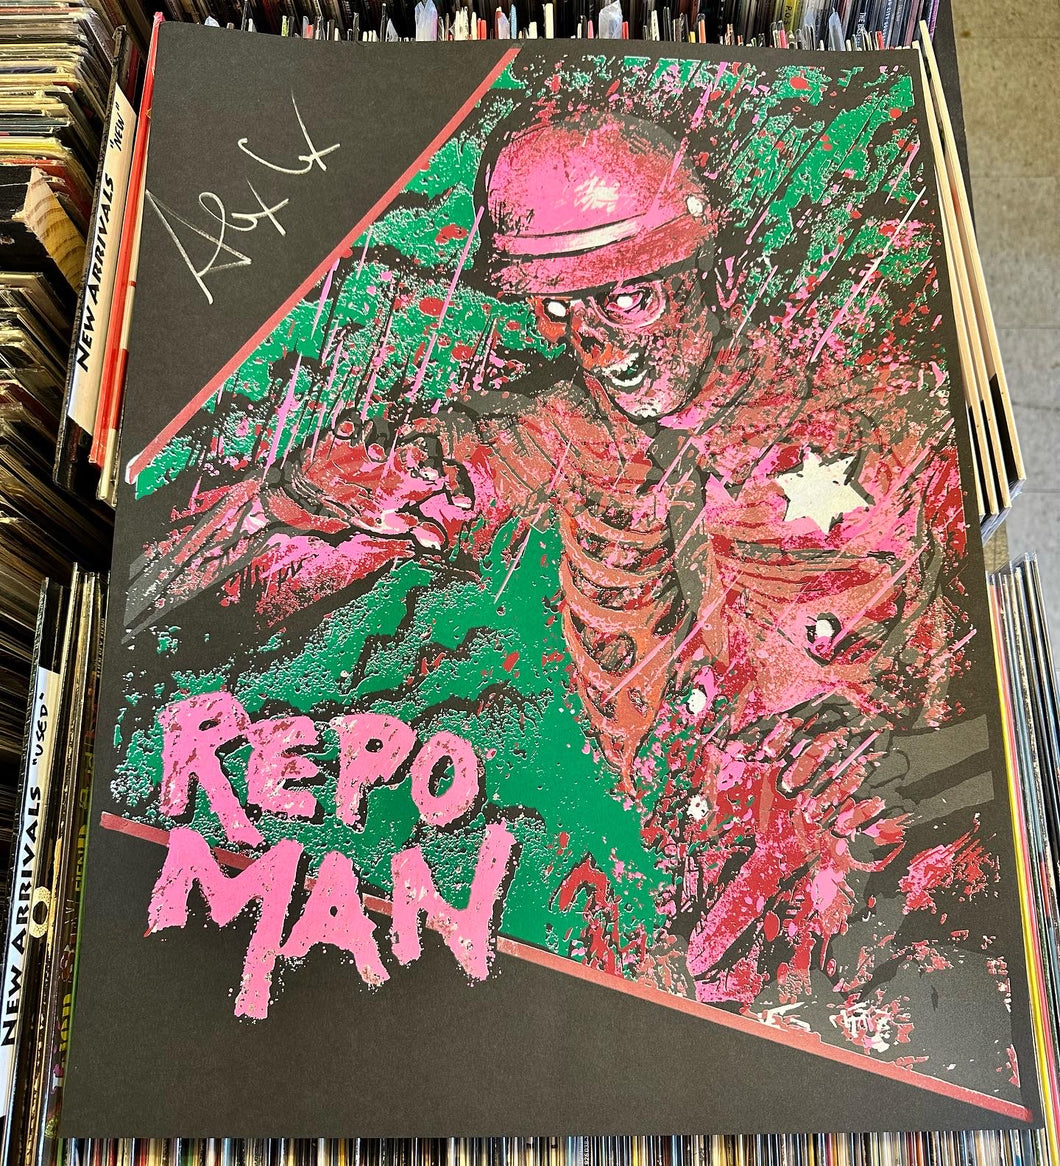 Repo Man Signed By Alex Cox Glow In The Dark Screen Print Poster 18x24